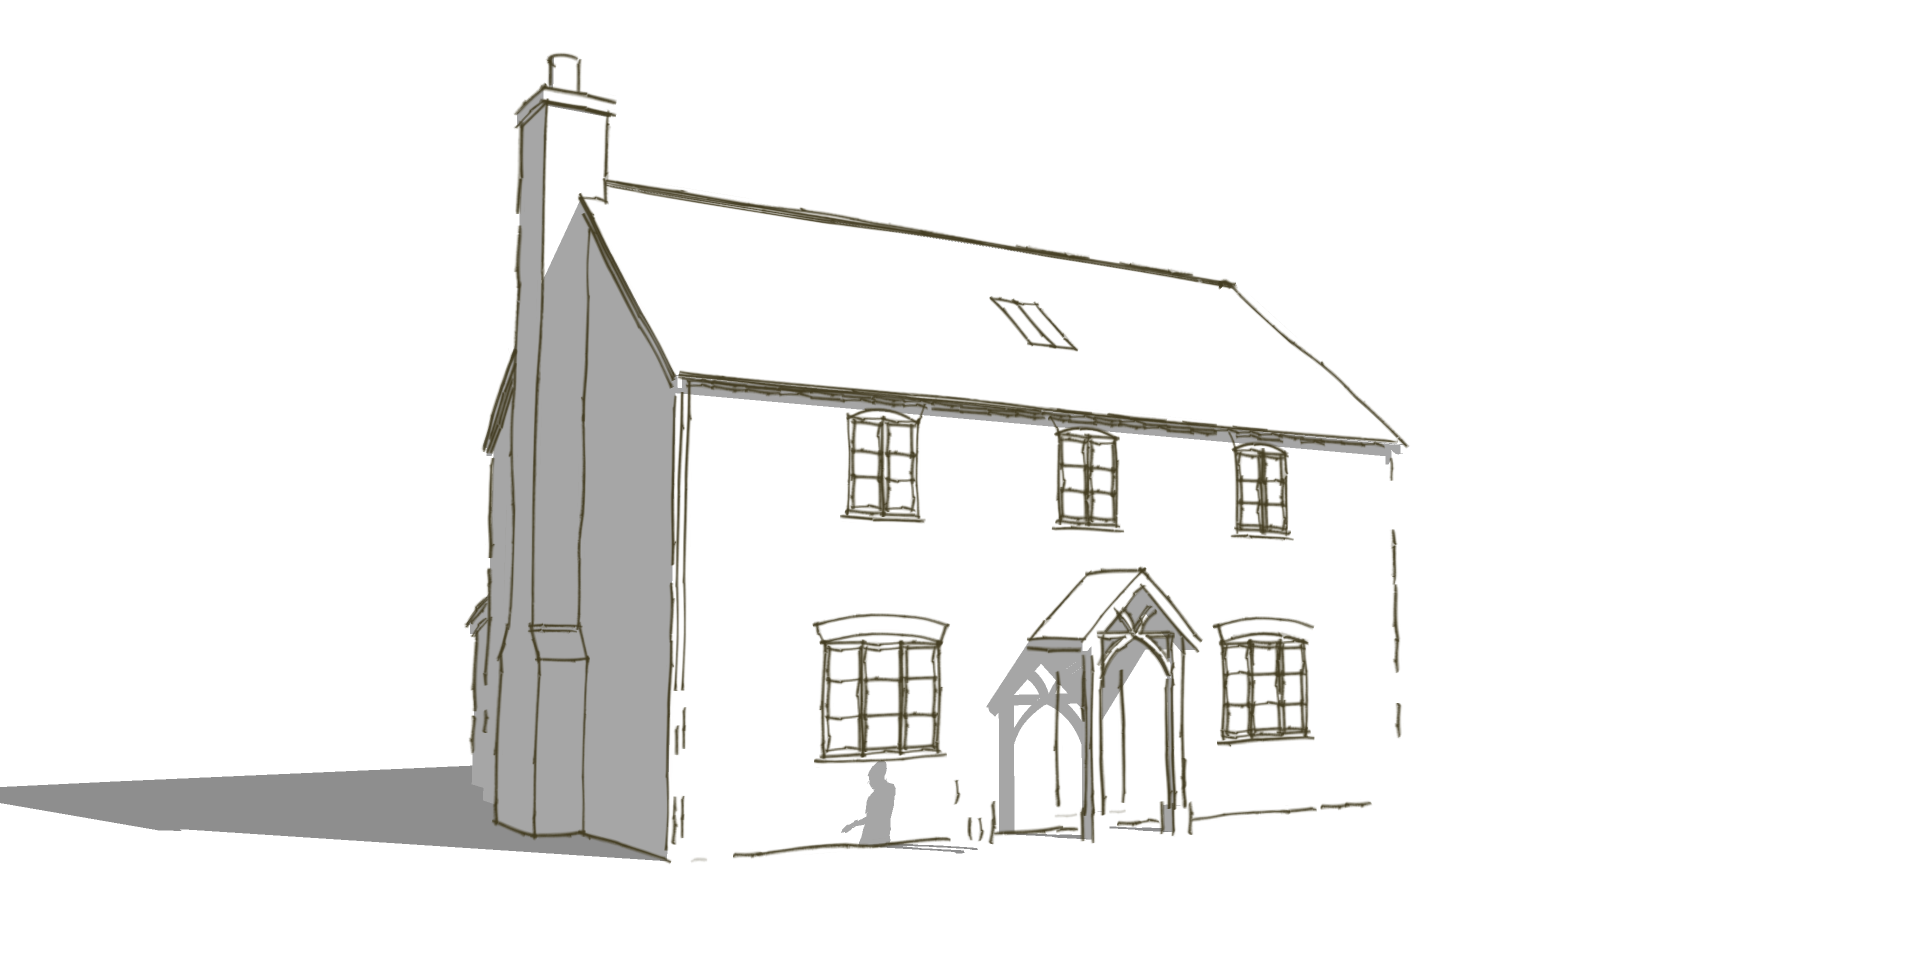   A new house that&nbsp;successfully achieved planning permission in a conservation area.  